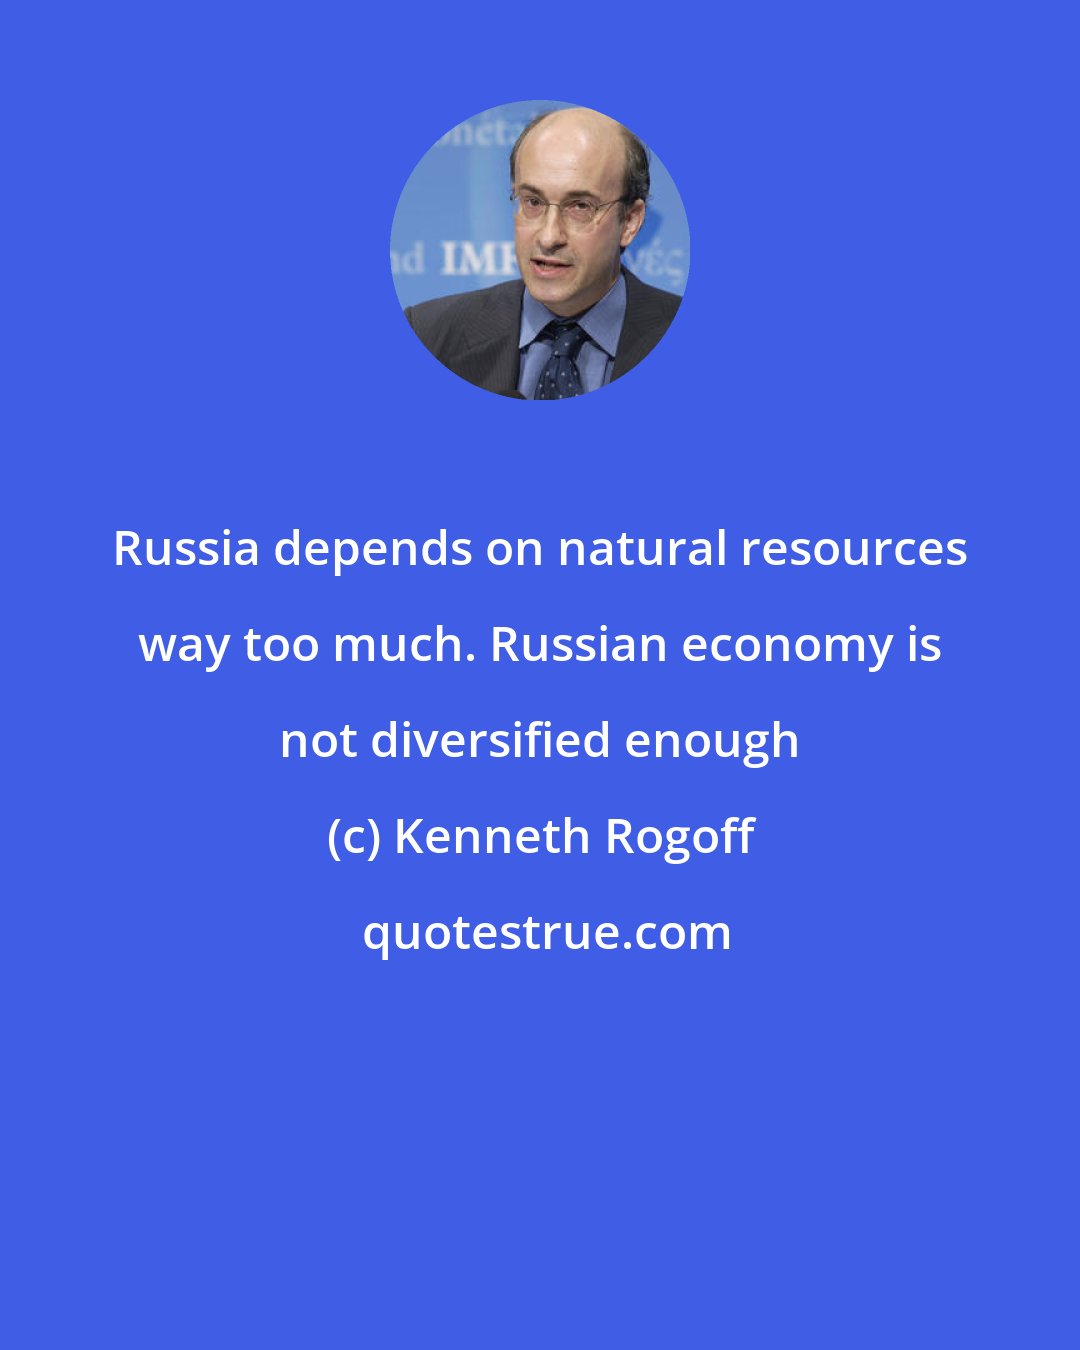 Kenneth Rogoff: Russia depends on natural resources way too much. Russian economy is not diversified enough